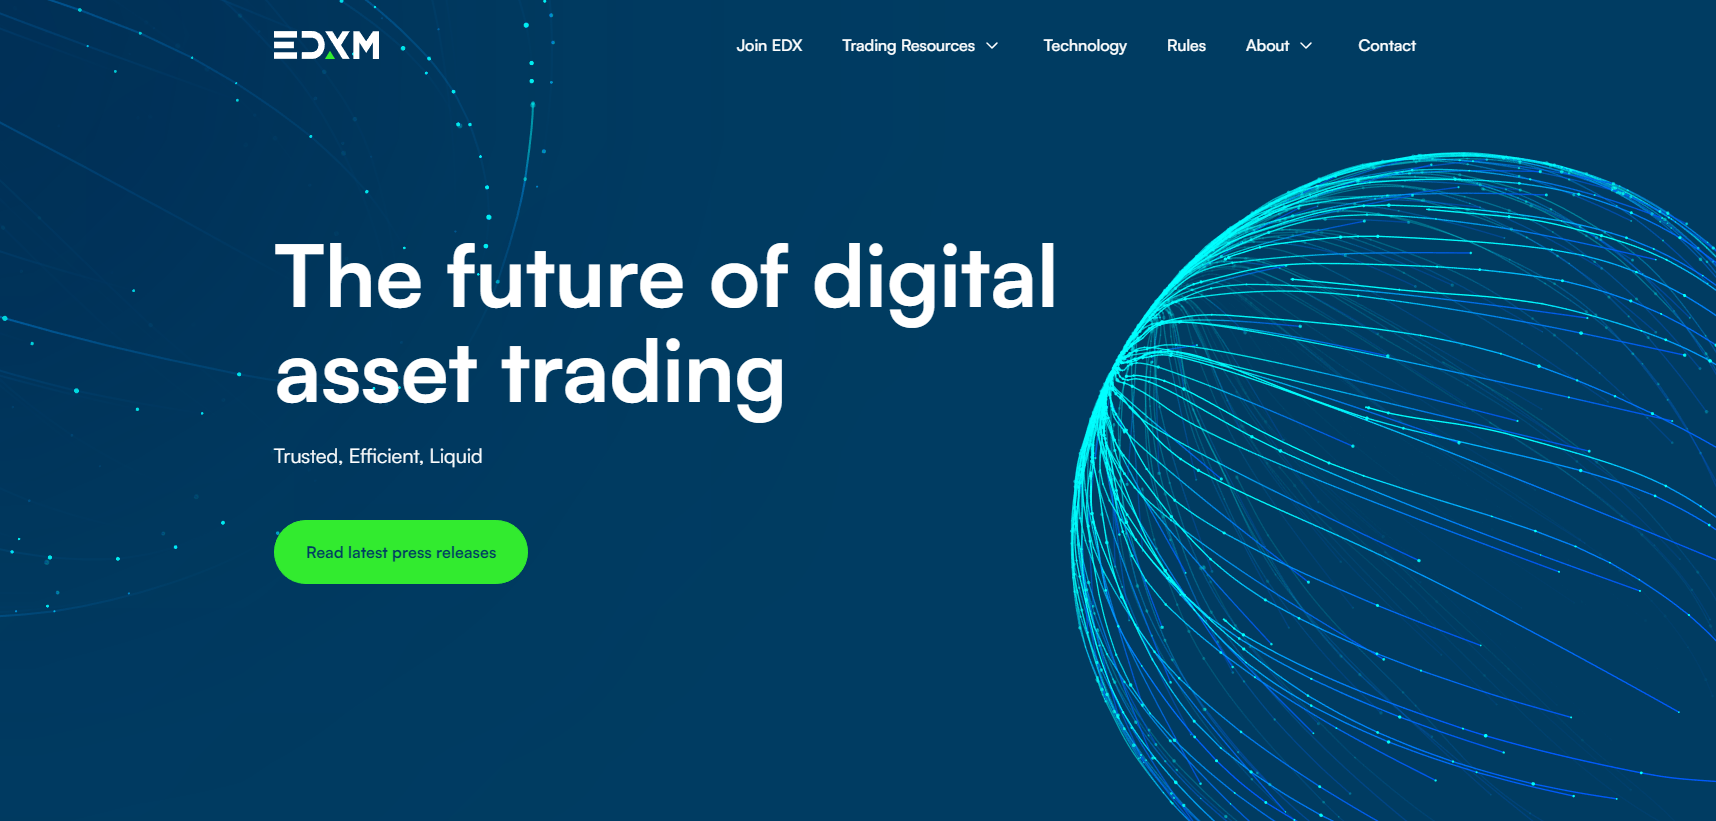 With funding from top investors, EDX Markets is revolutionizing the digital asset marketplace.